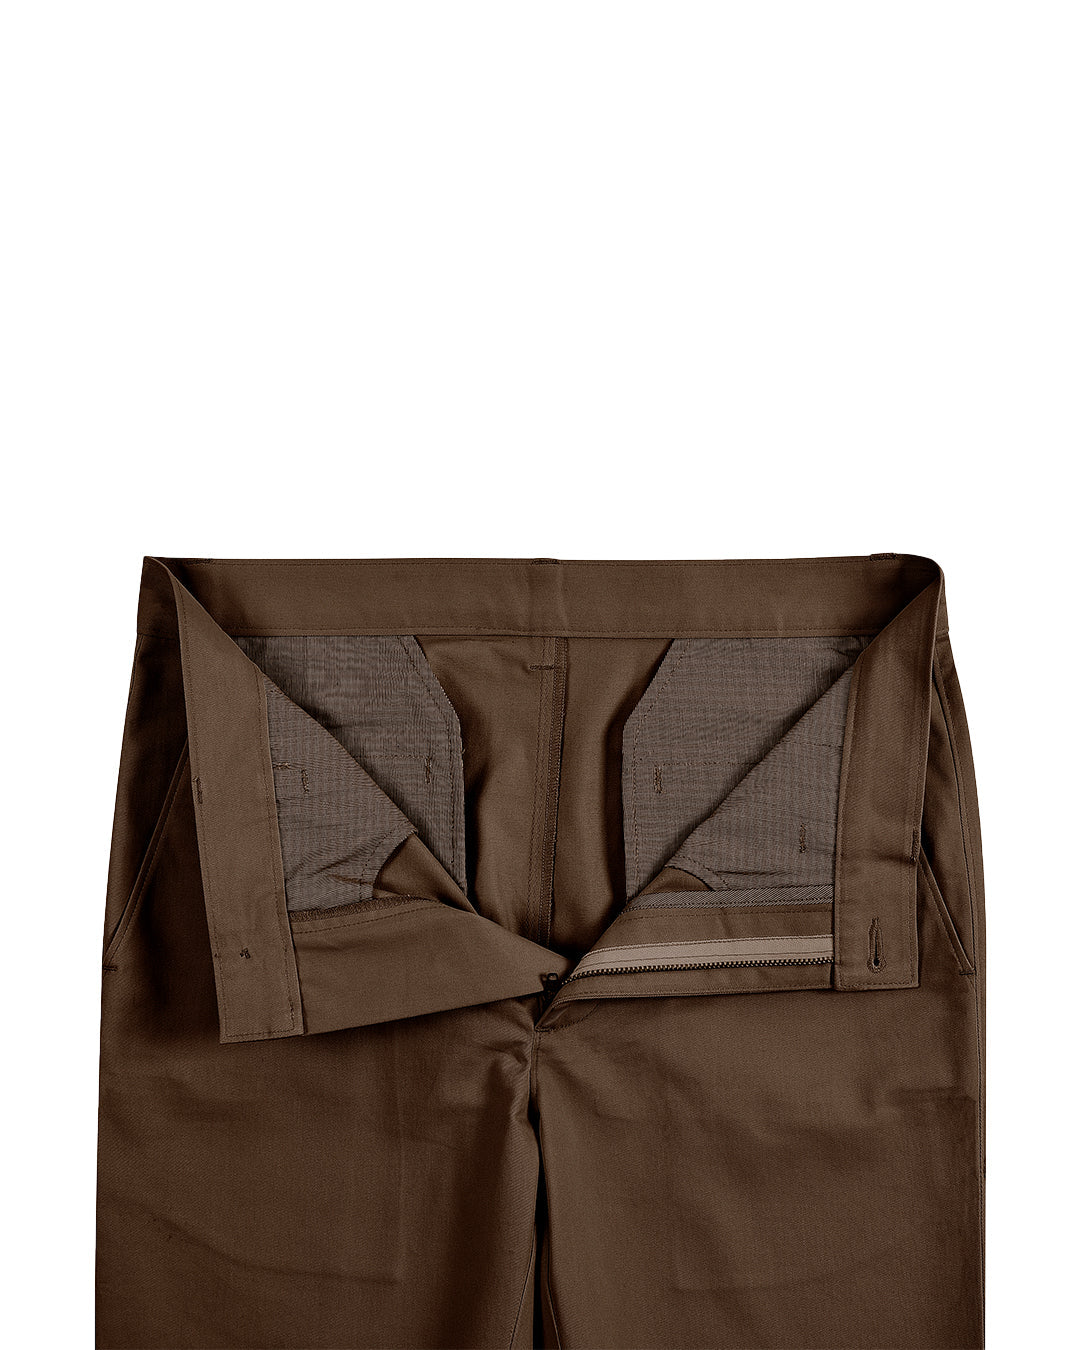 Front open view of custom Genoa Chino pants for men by Luxire in coffee brown